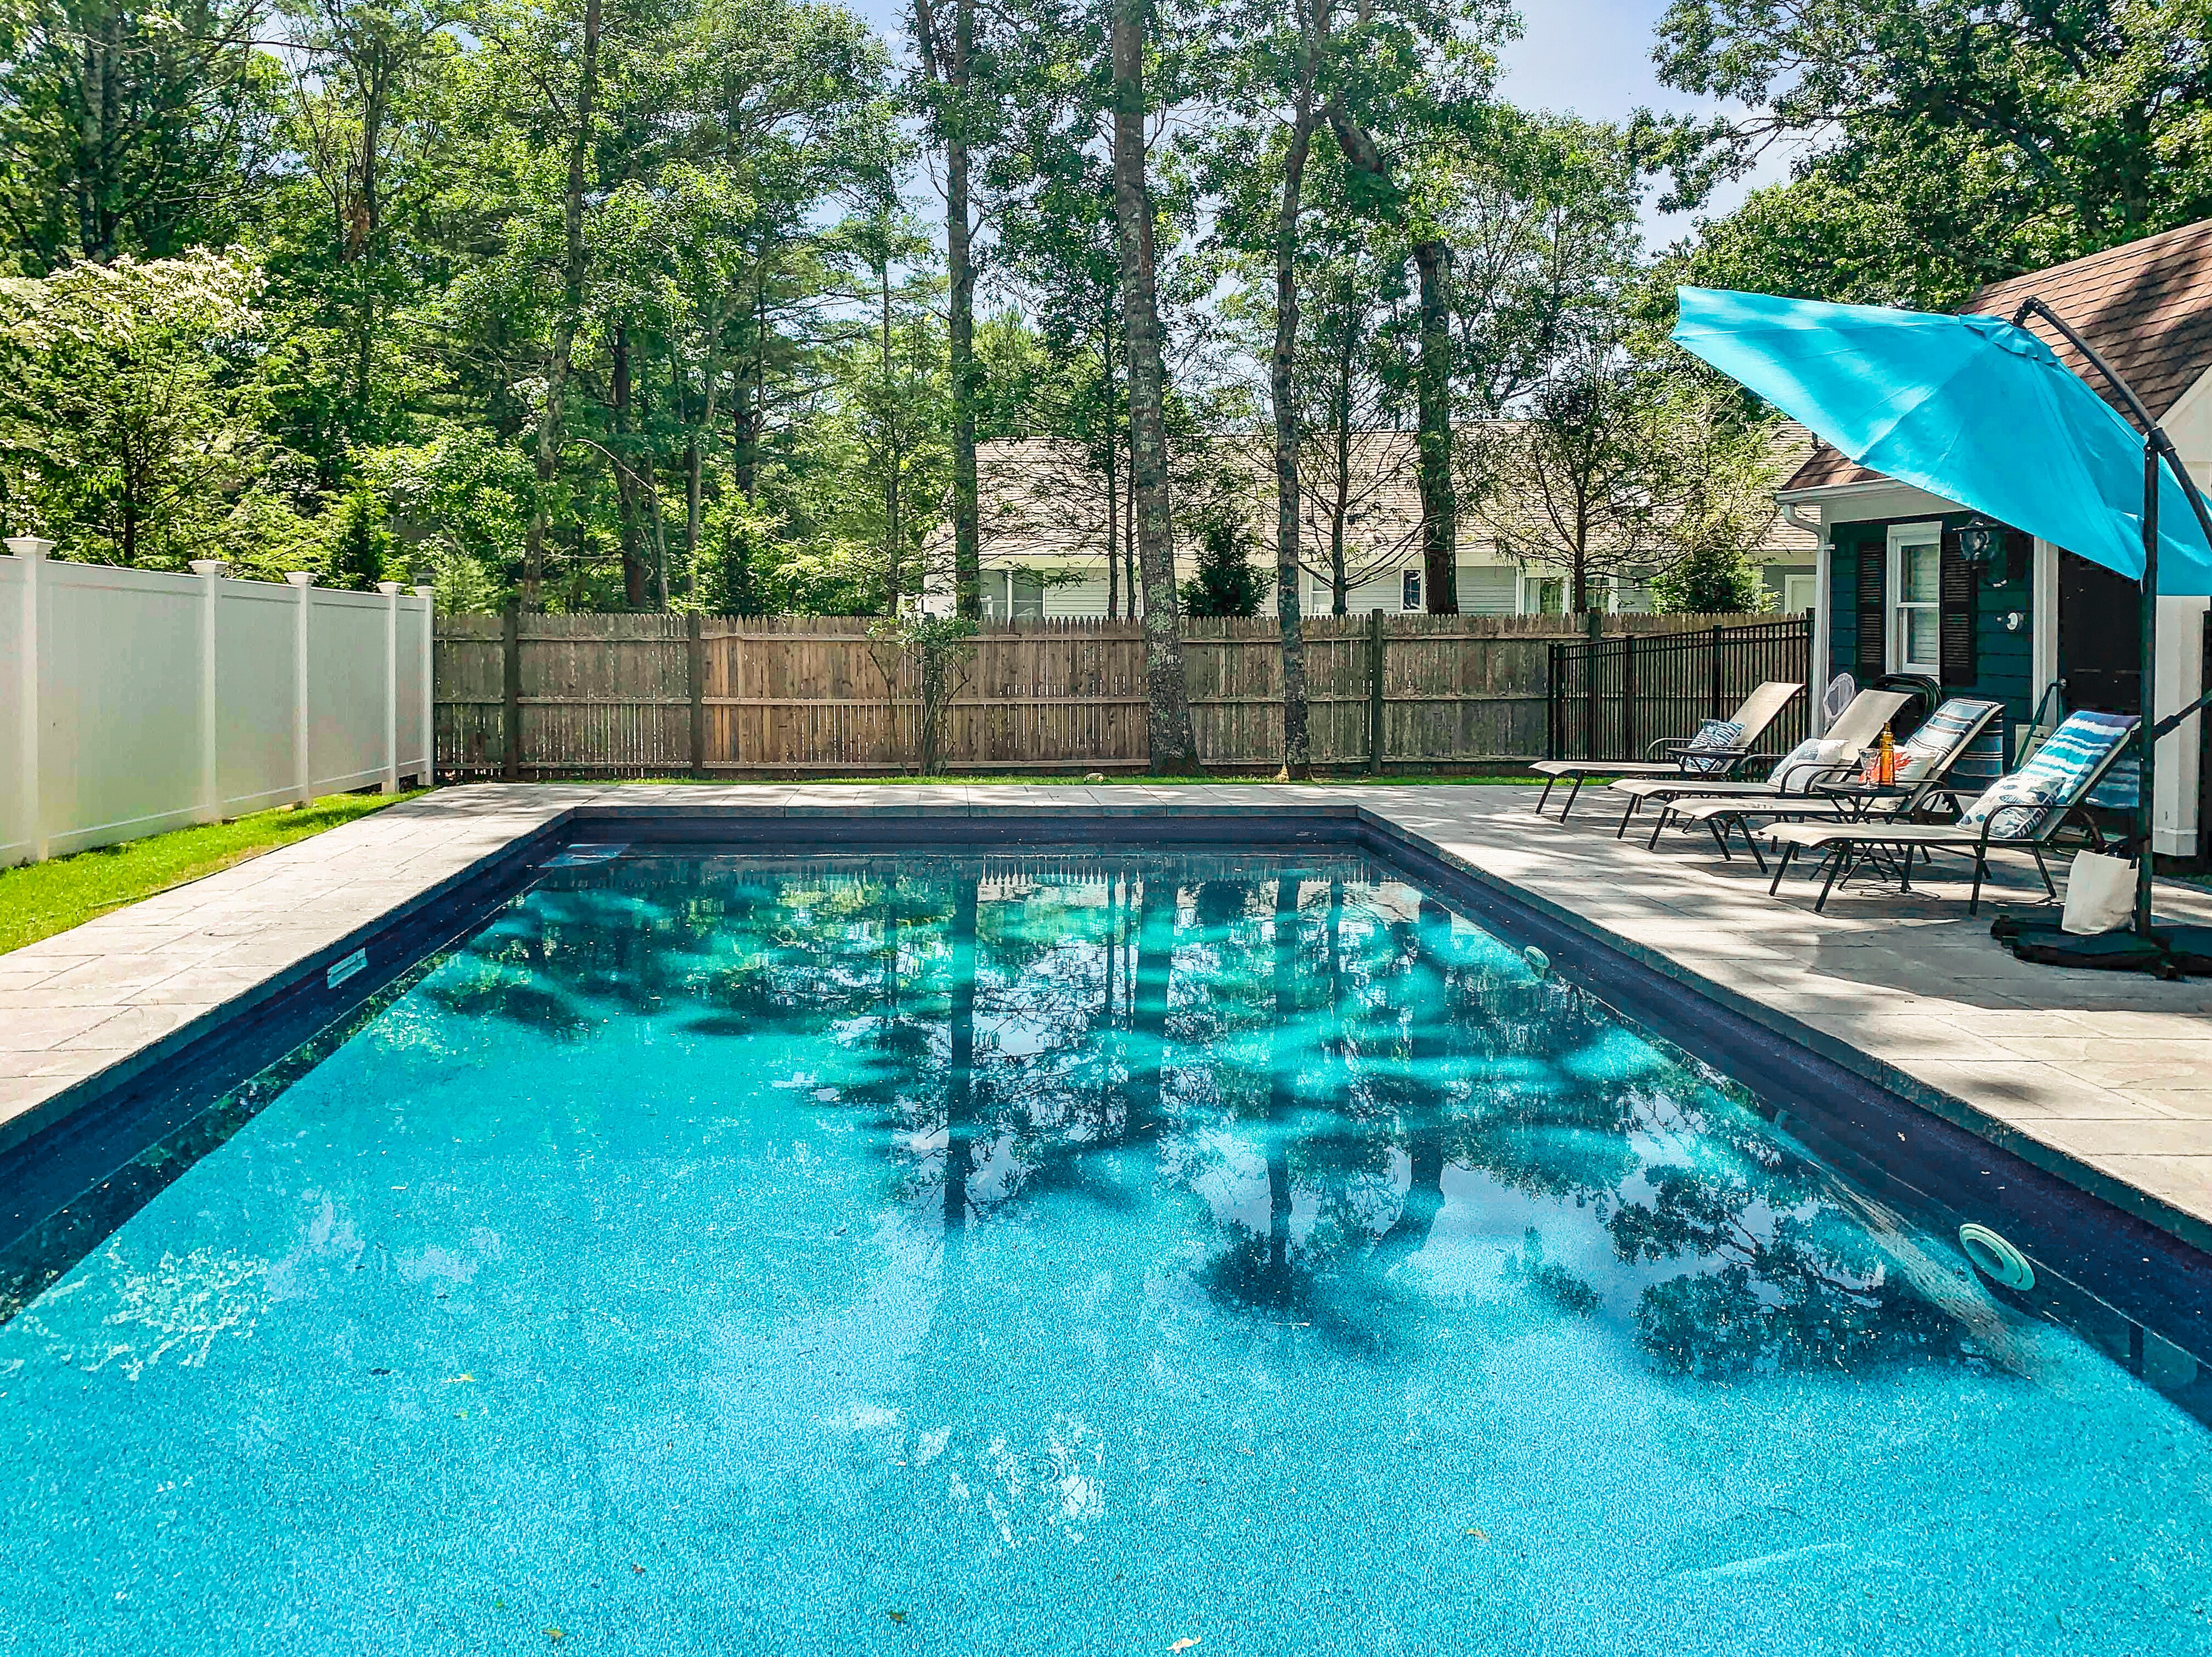 Property Image 1 - 21001: Contemporary Gem with Private Pool & Great Outdoor Living Space!